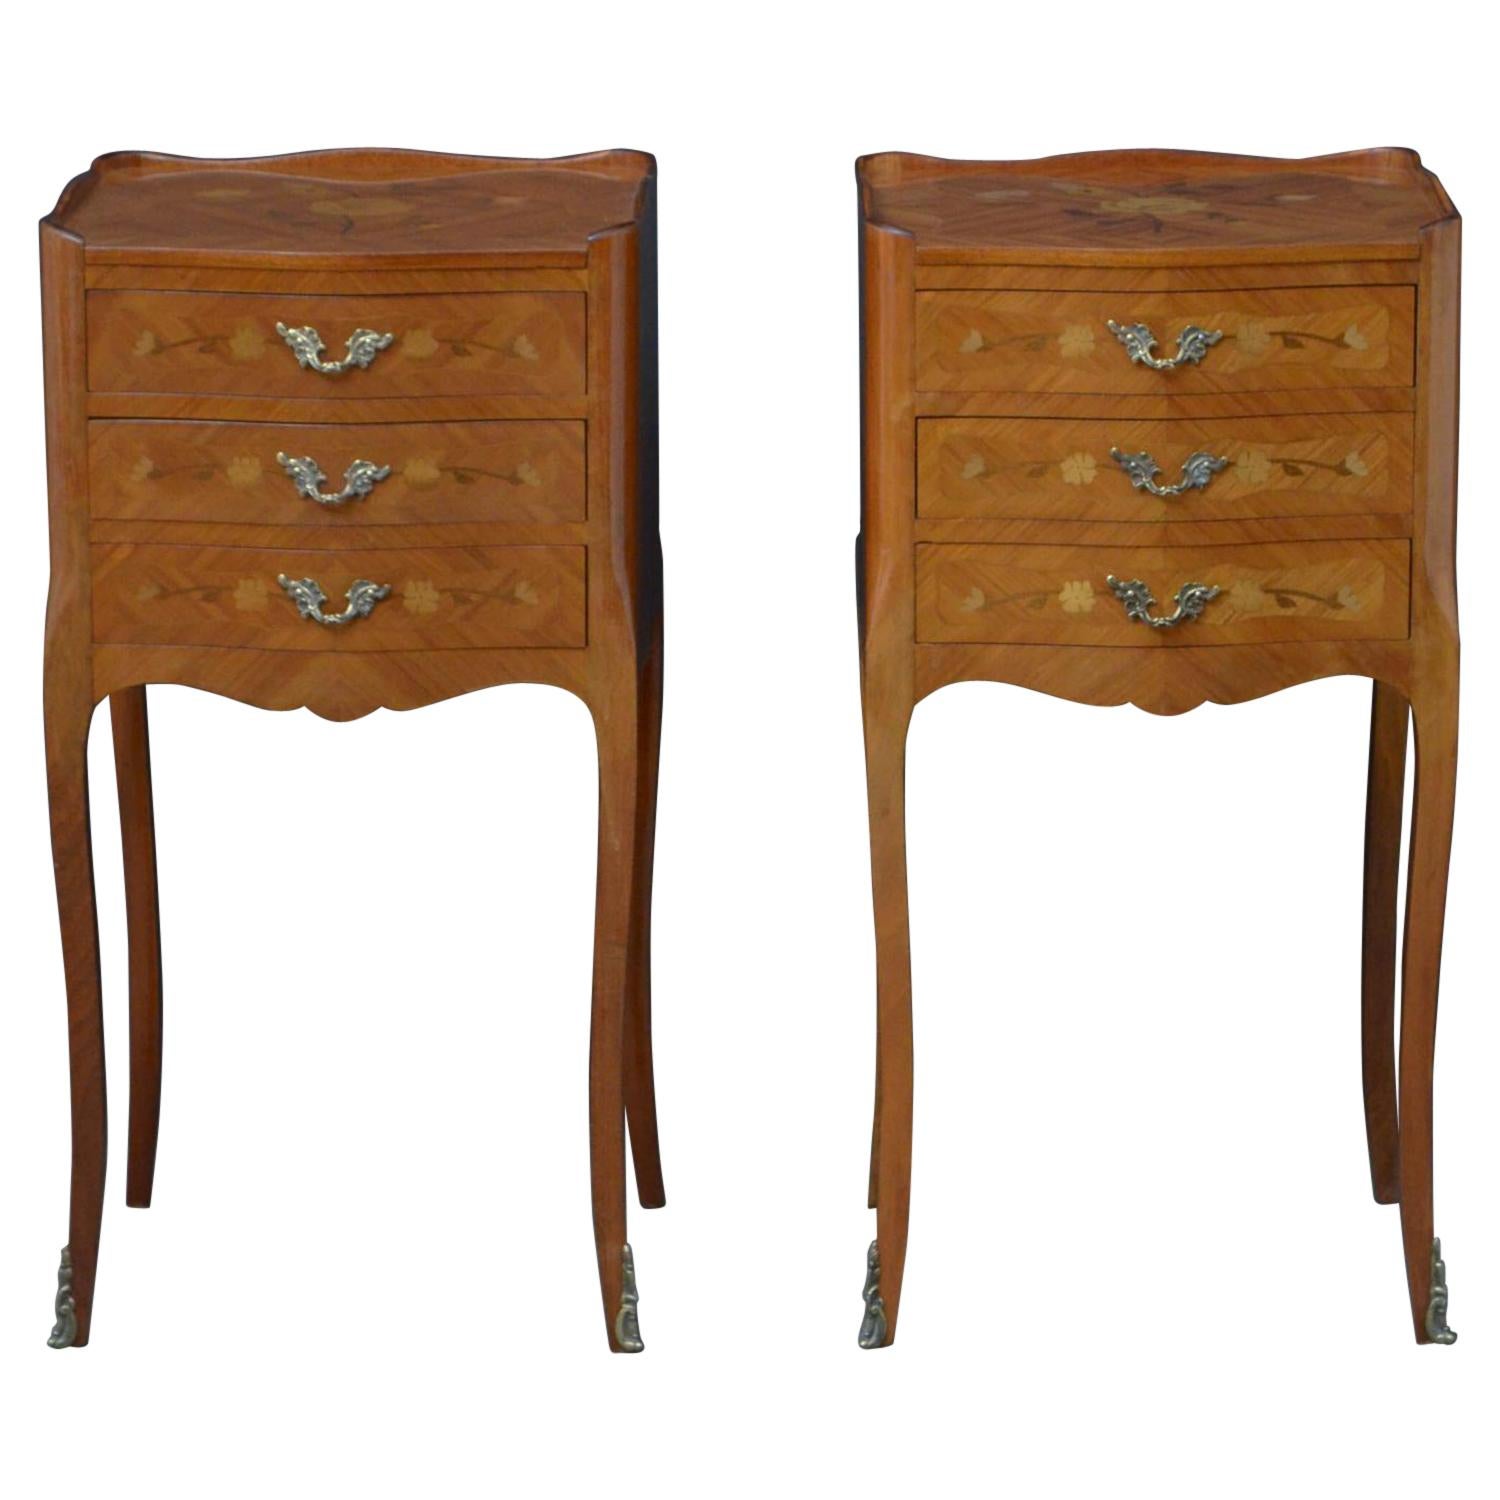 Attractive Pair of Bedside Cabinets For Sale